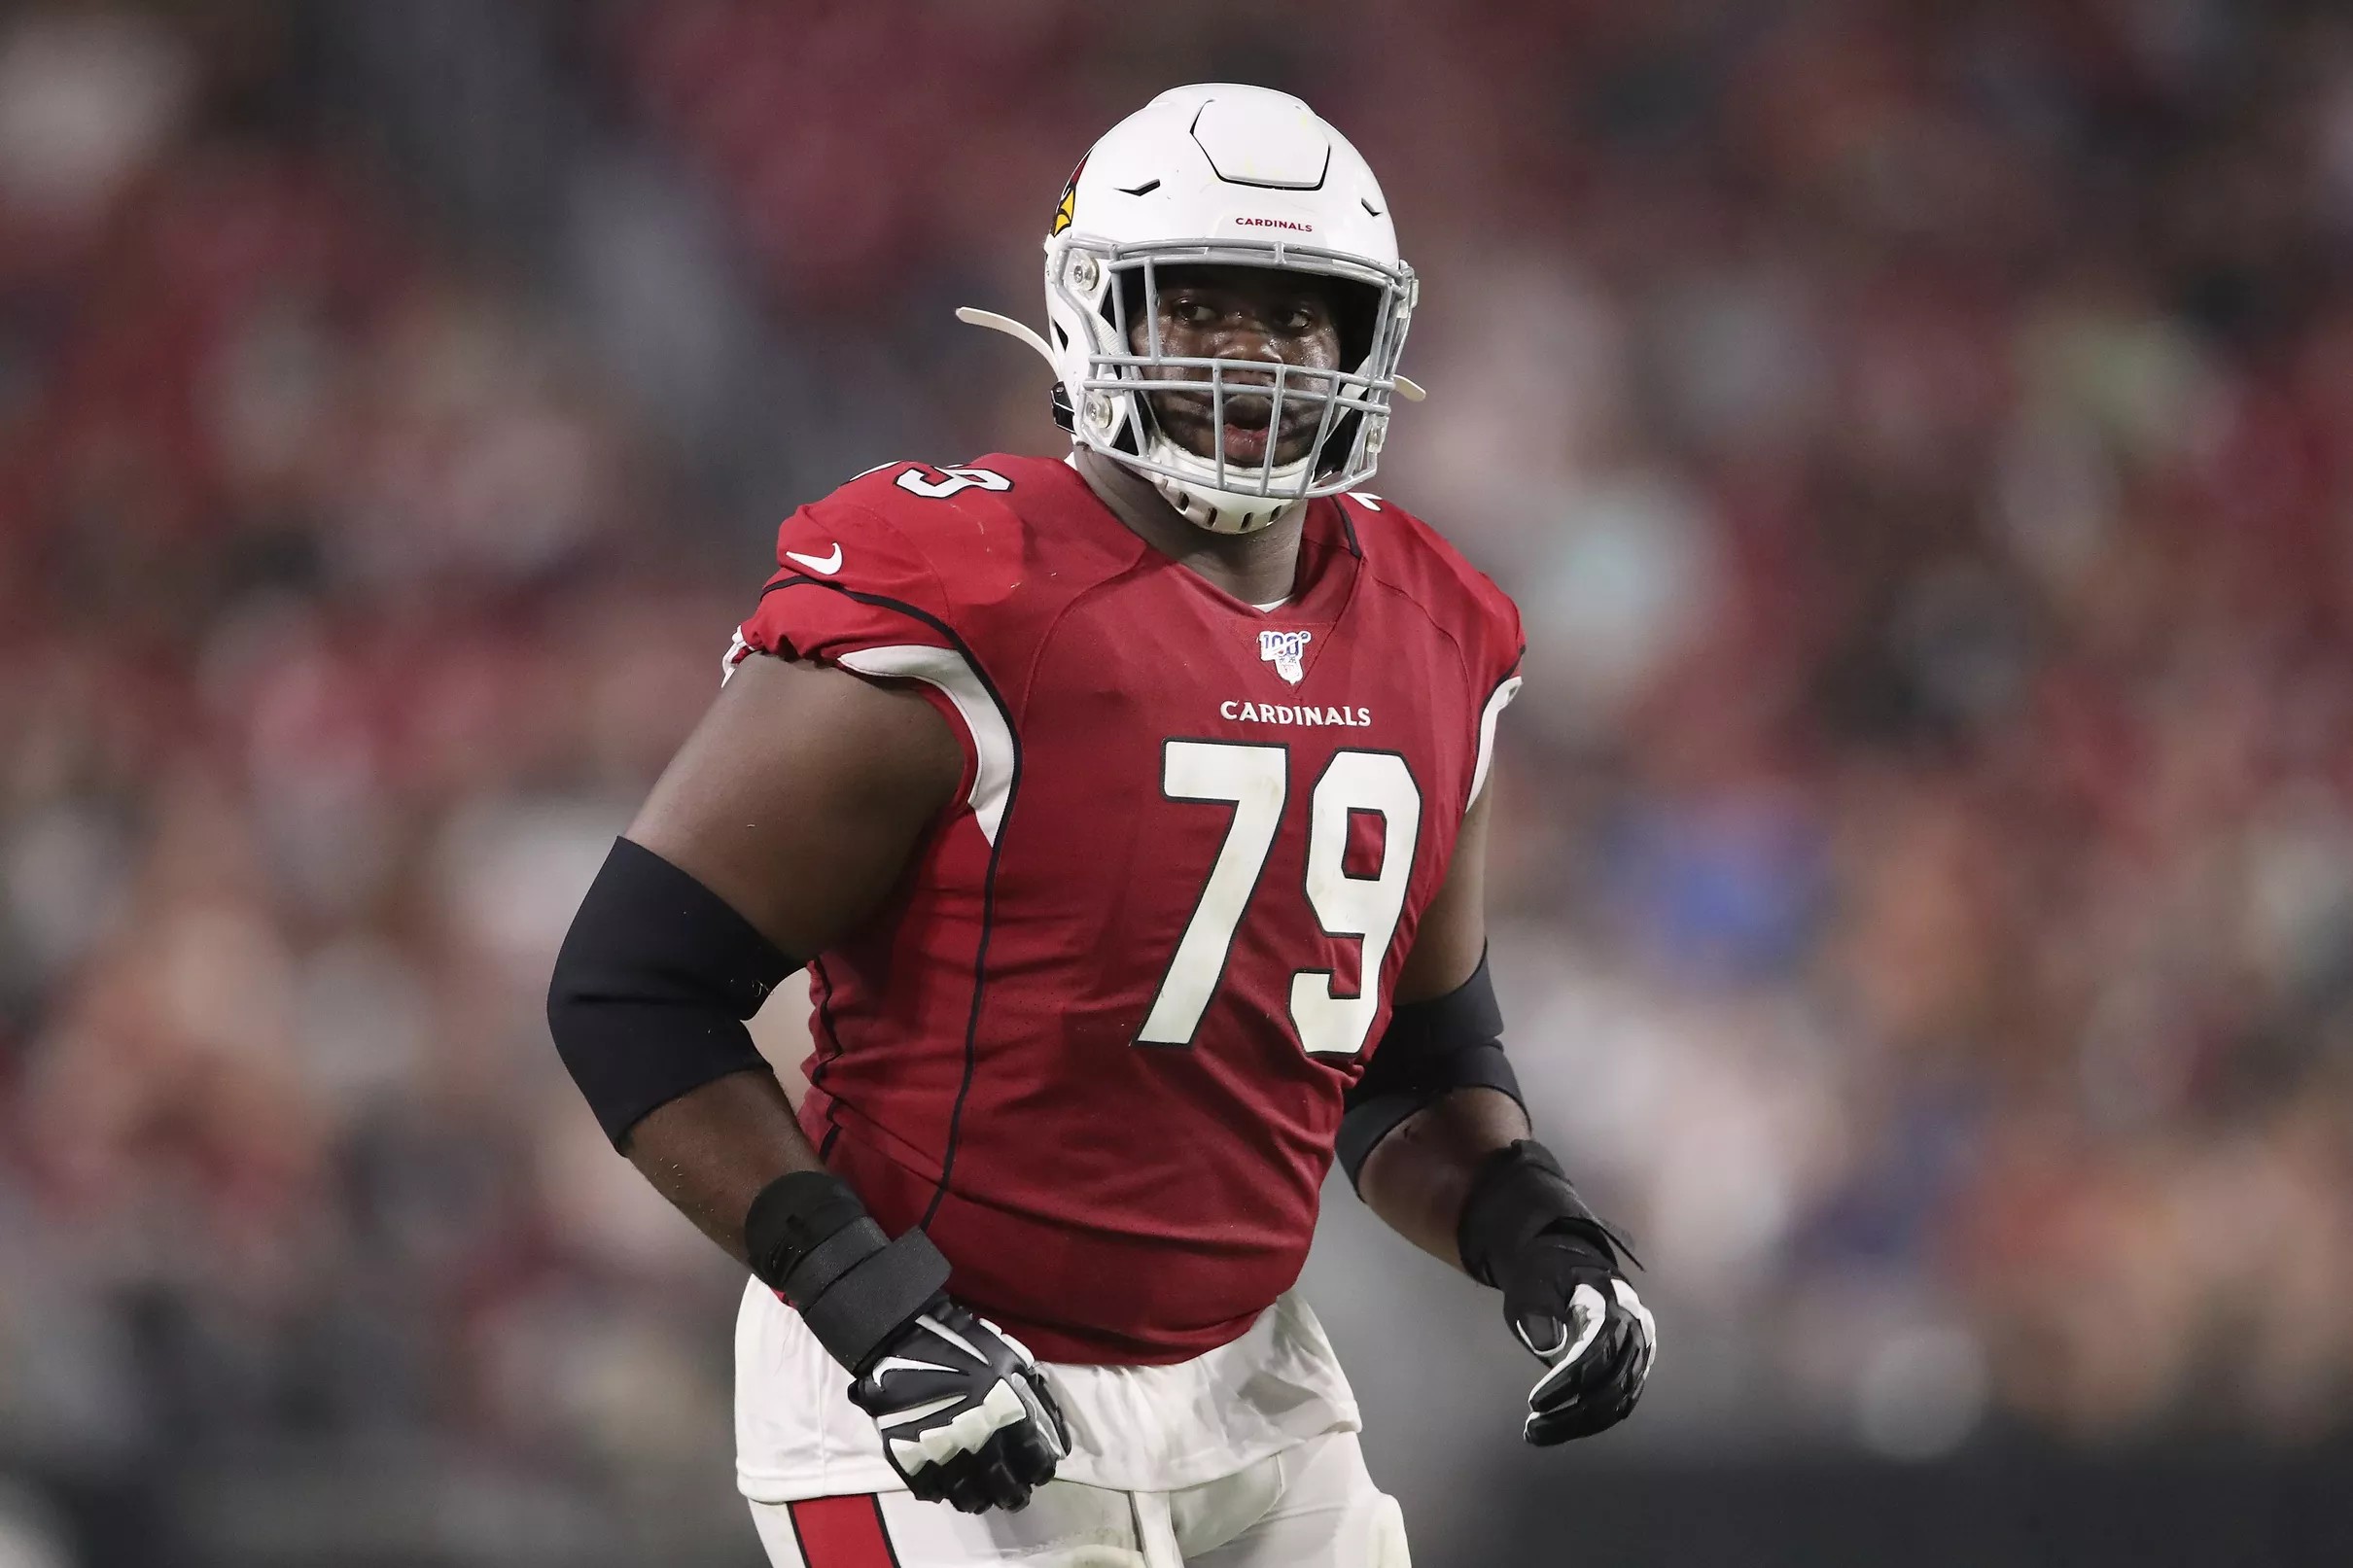 Patriots acquire offensive tackle Korey Cunningham from Cardinals